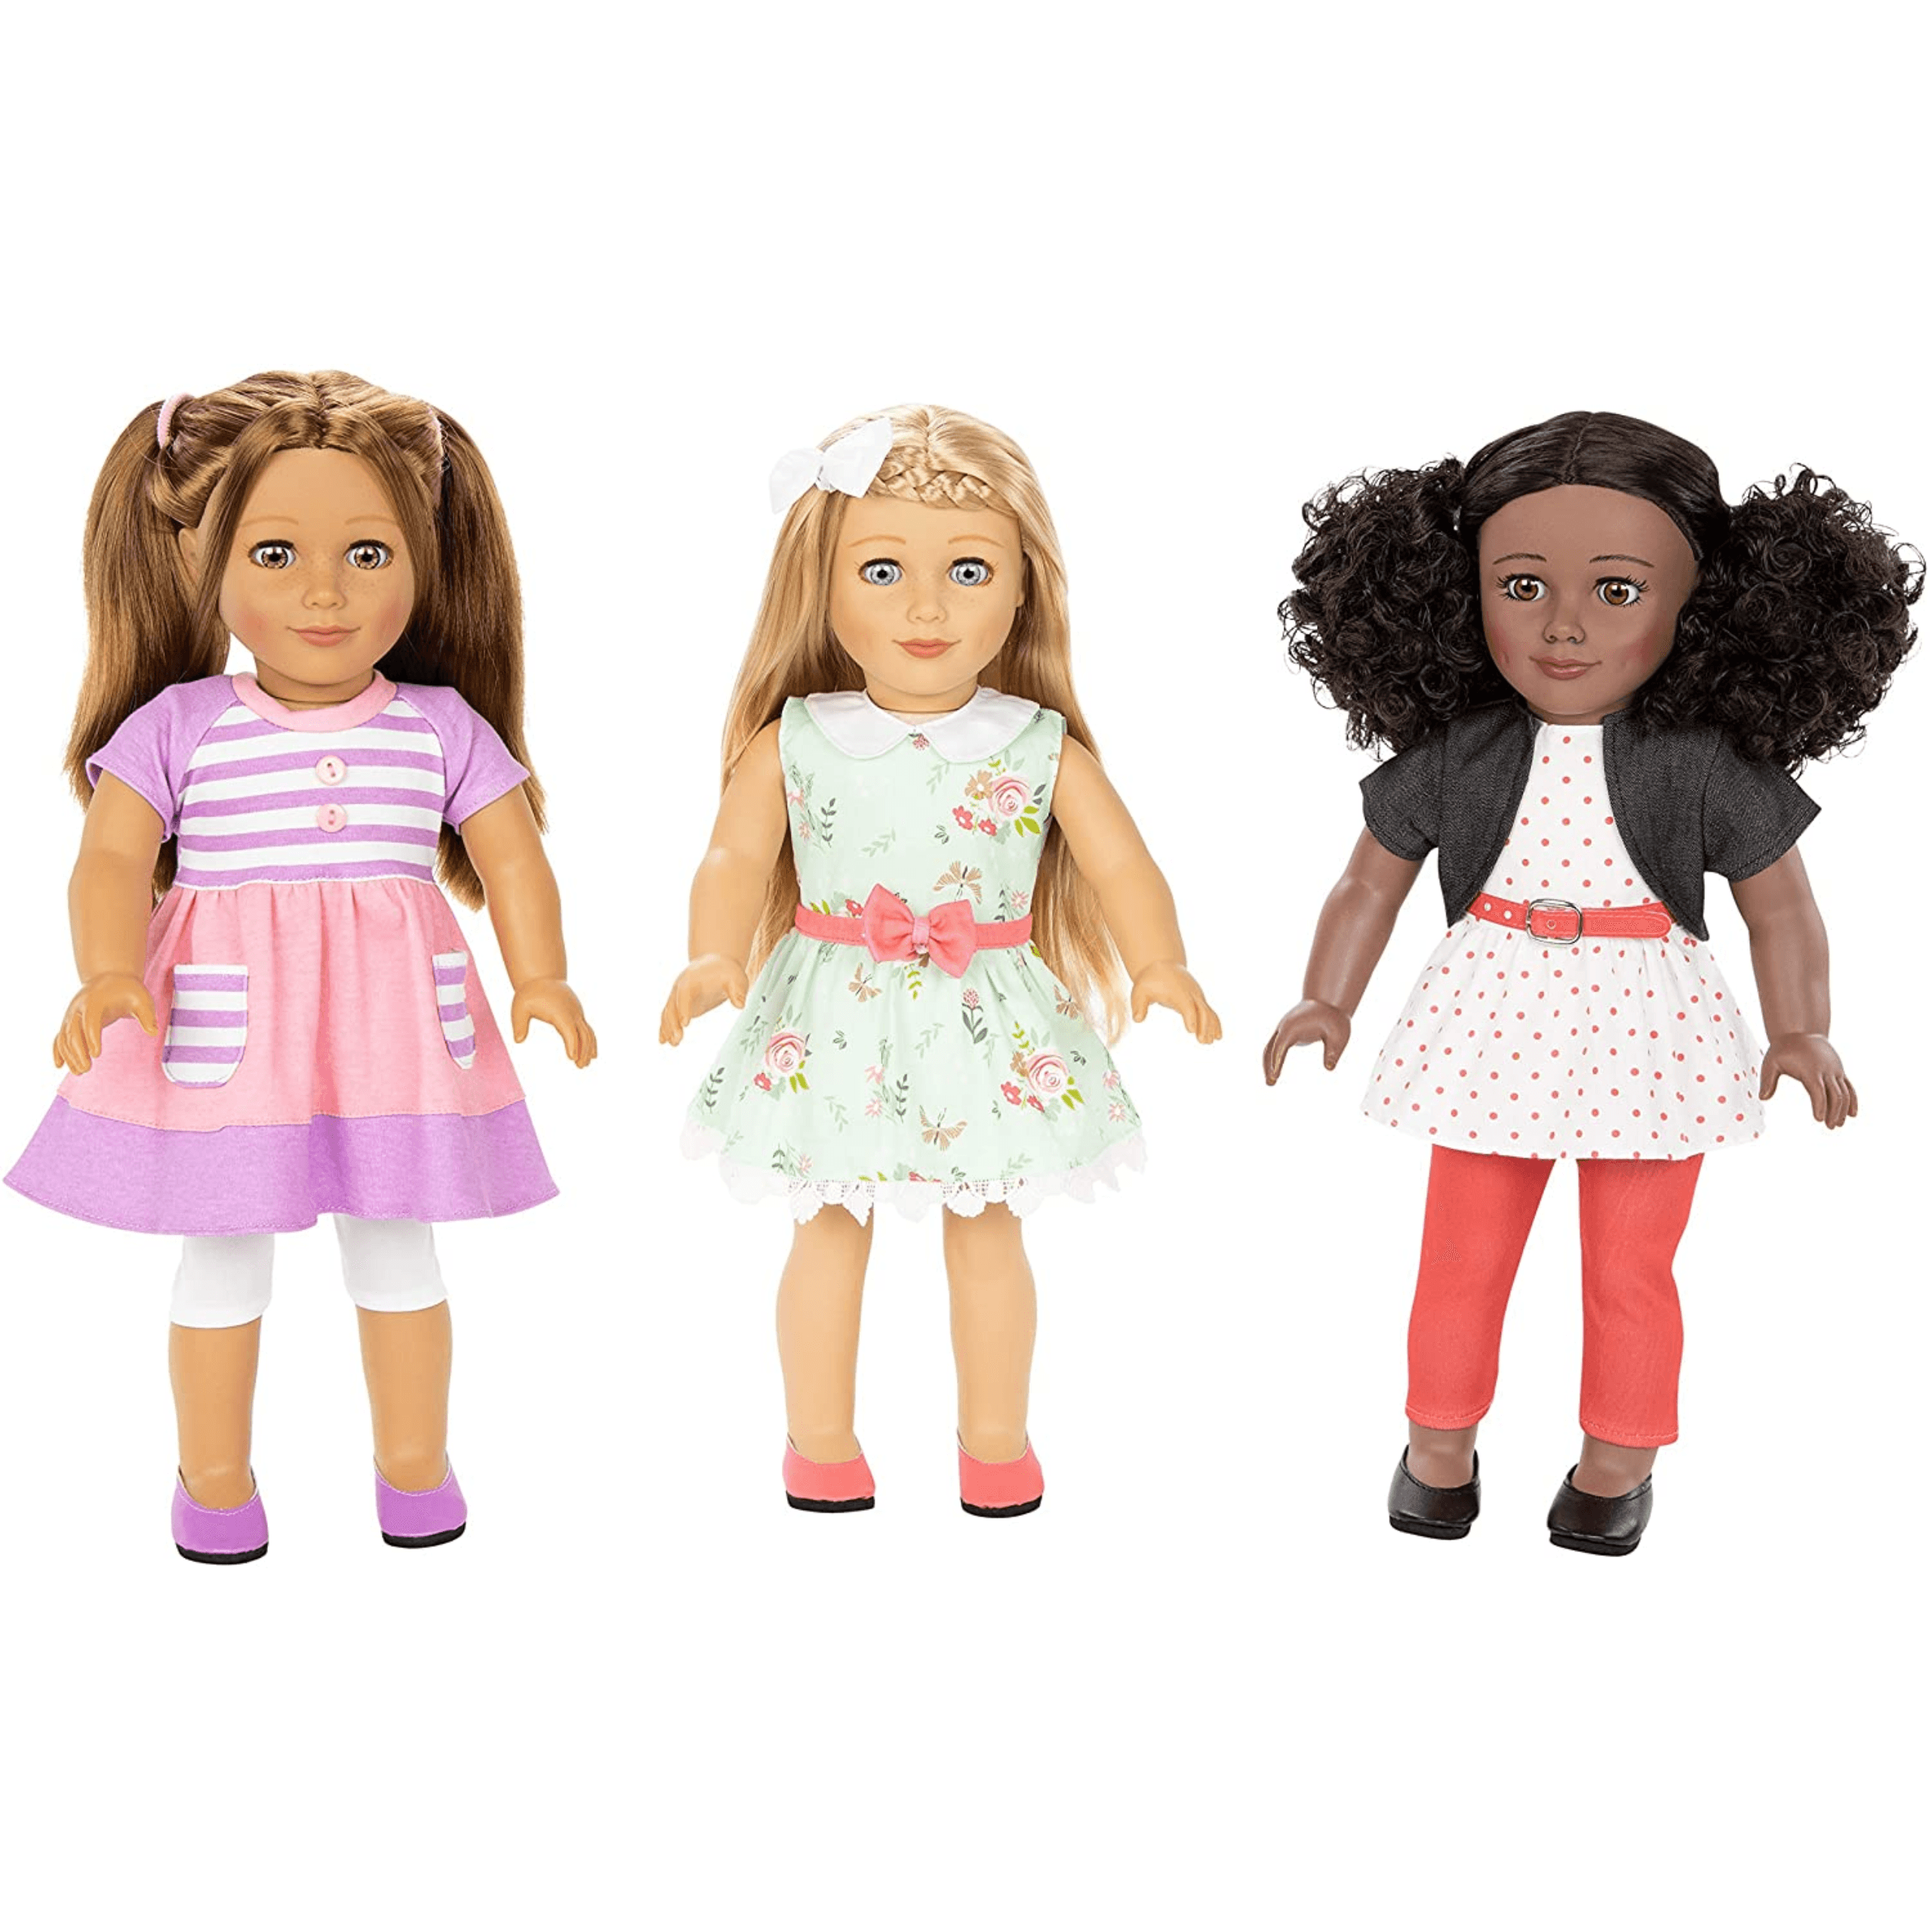 Playtime by Eimmie 18 Inch Vinyl Doll Eimmie Set with Backpack Carry Case - OrangeOnions Wholesale